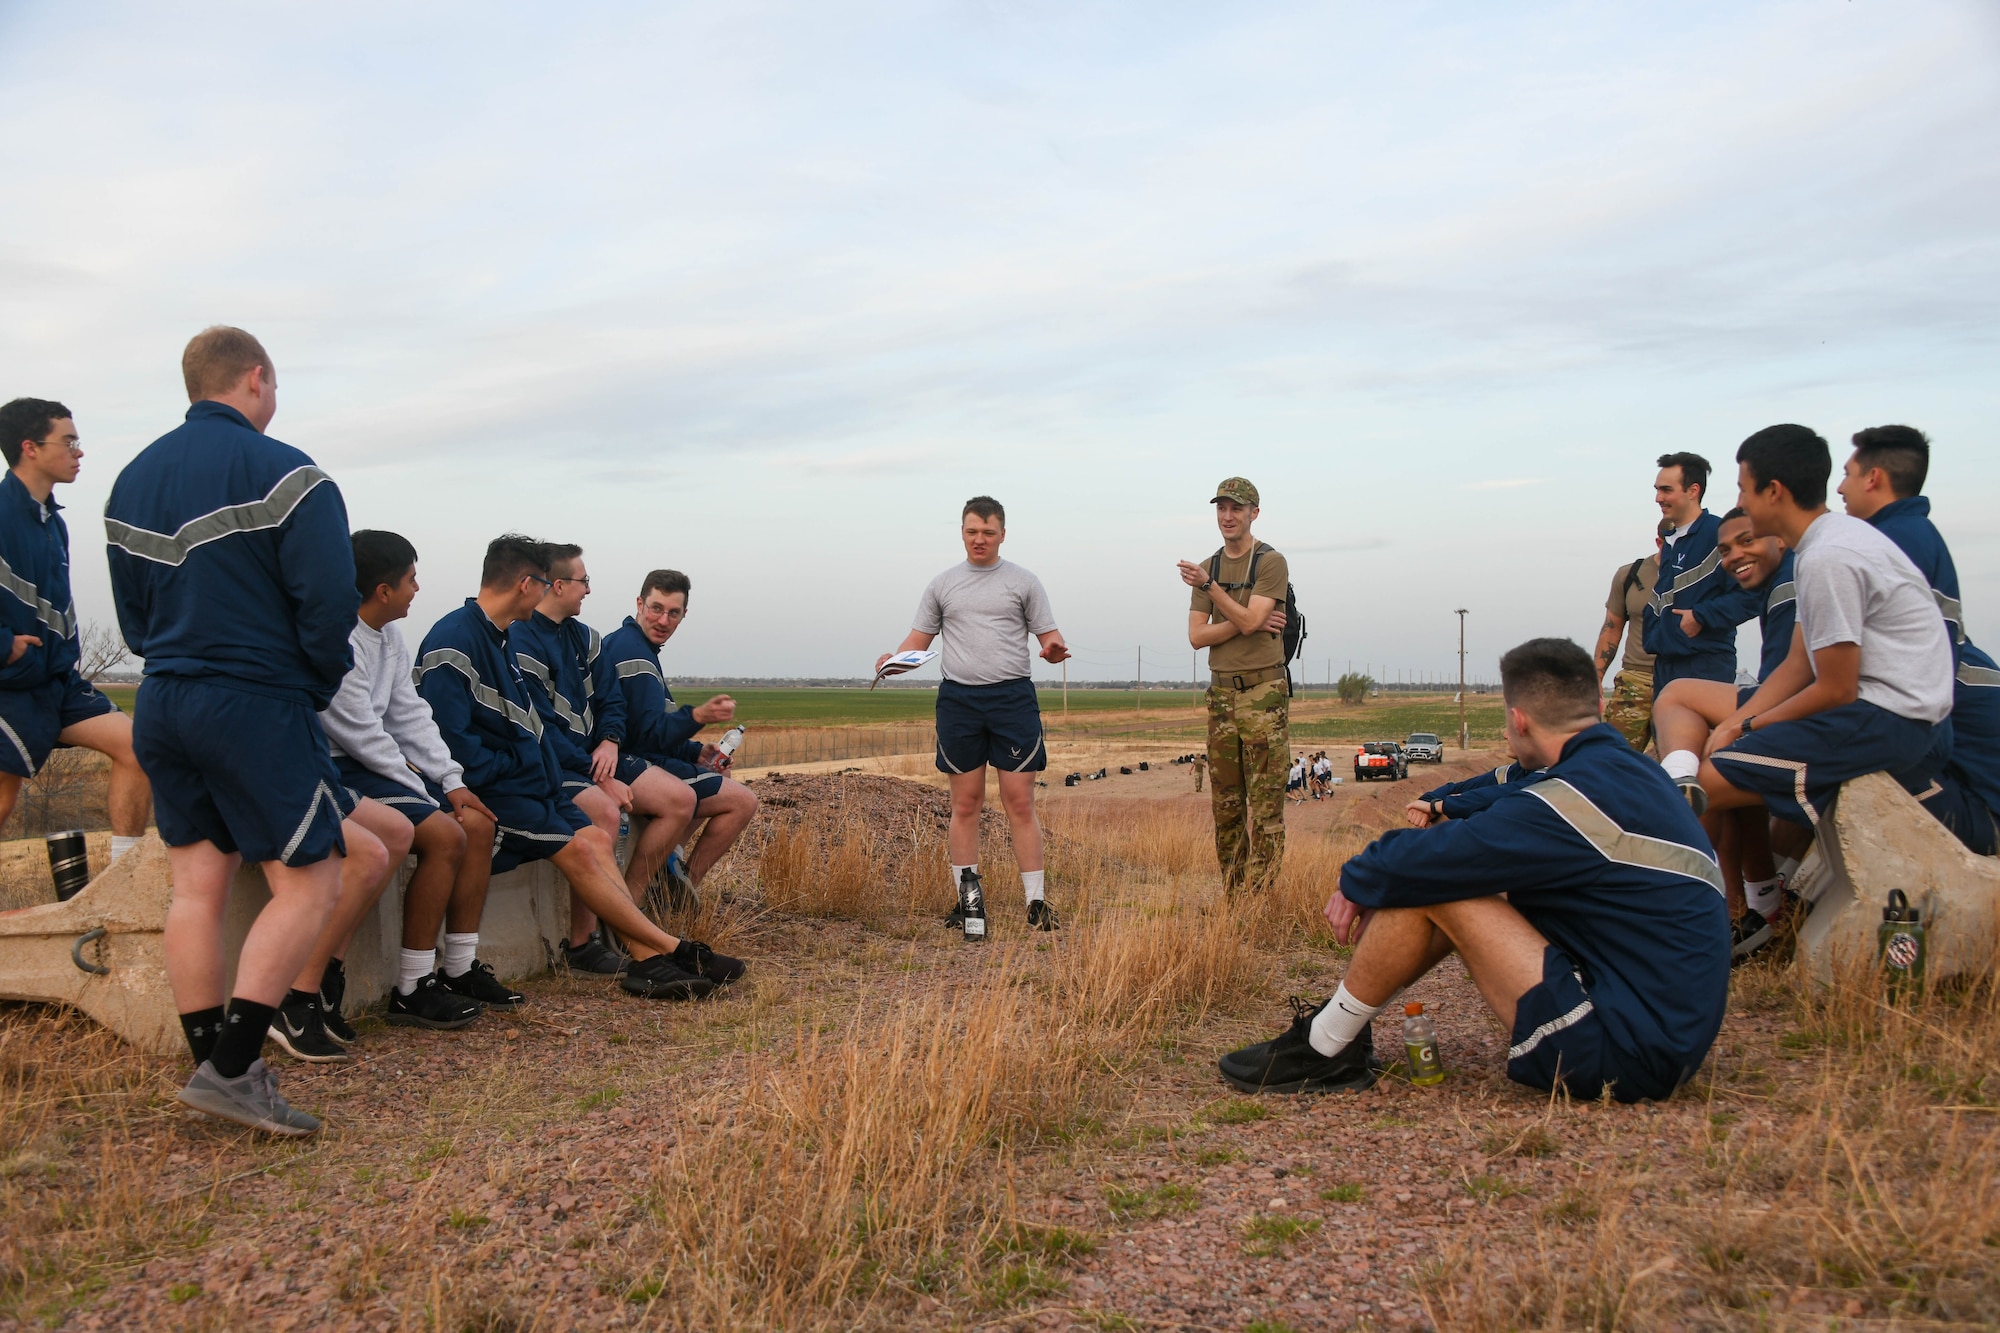 U.S. Air Force Capt. James Newman, 97th Training Squadron flight commander, leads a group of students in an Airmanship lesson at Altus Air Force Base, Oklahoma, April 10, 2022. The Airmanship lessons were focused on the Air Force core values: integrity first, service before self and excellence in all we do. (U.S. Air Force photo by Airman 1st Class Trenton Jancze)